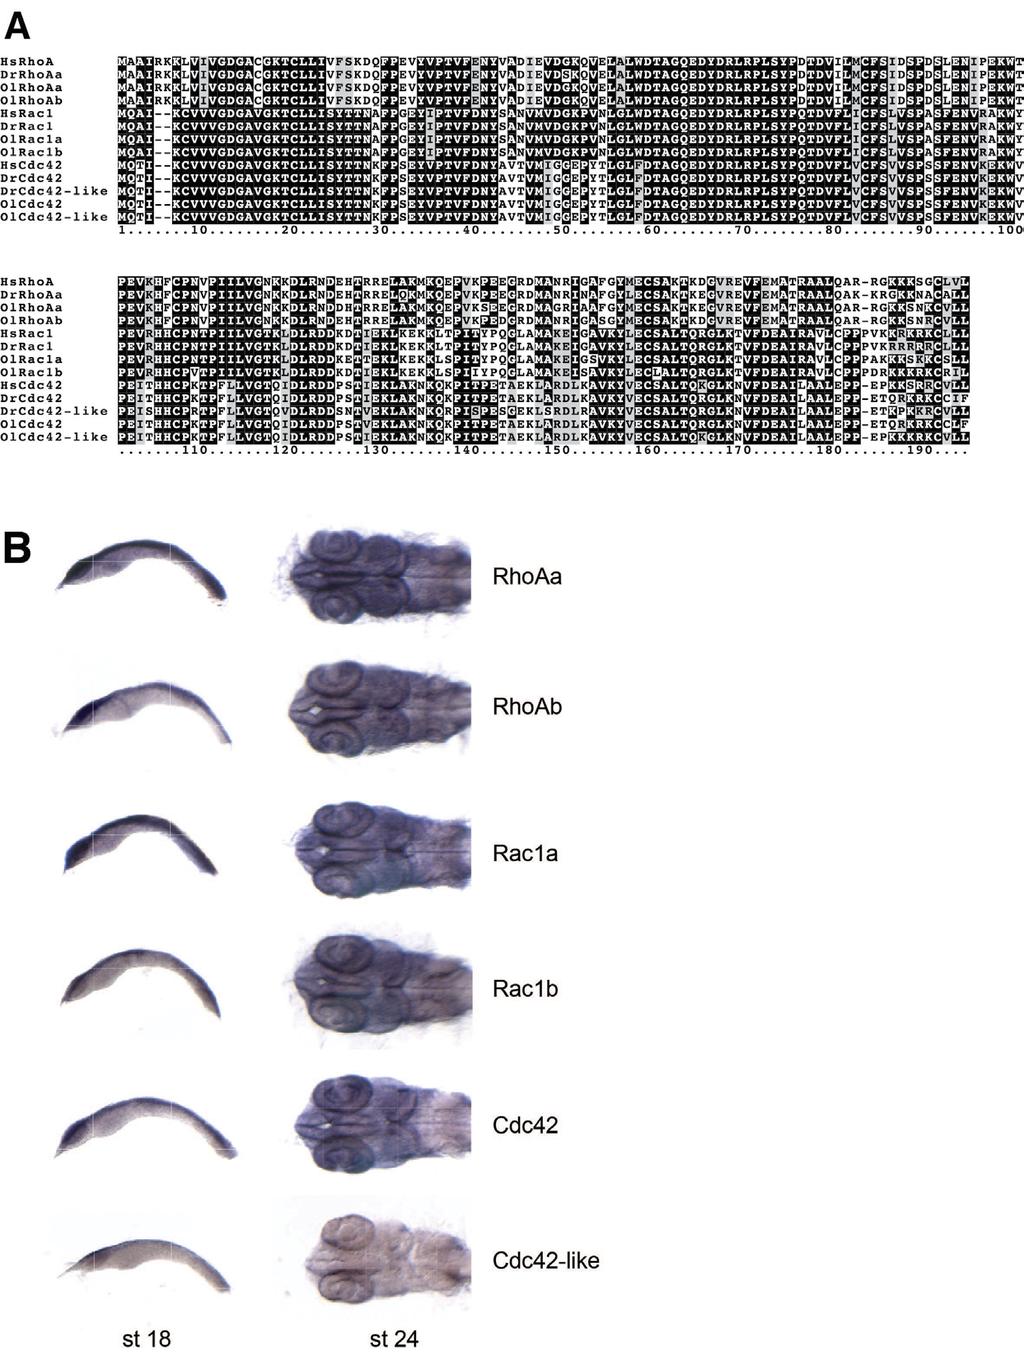 Fig. S4. Vertebrate RhoA, Rac1 and Cdc42 GTPases are highly conserved and ubiquitously expressed in medaka embryos at neurula and organogenesis stages.